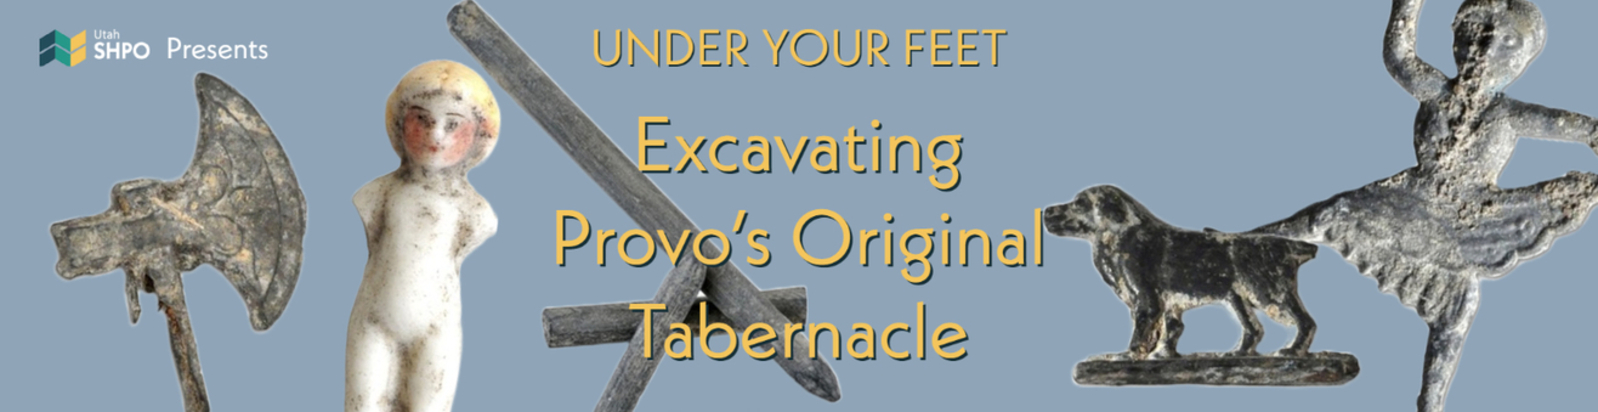 Featured image for “Excavating Provo’s Original Tabernacle”